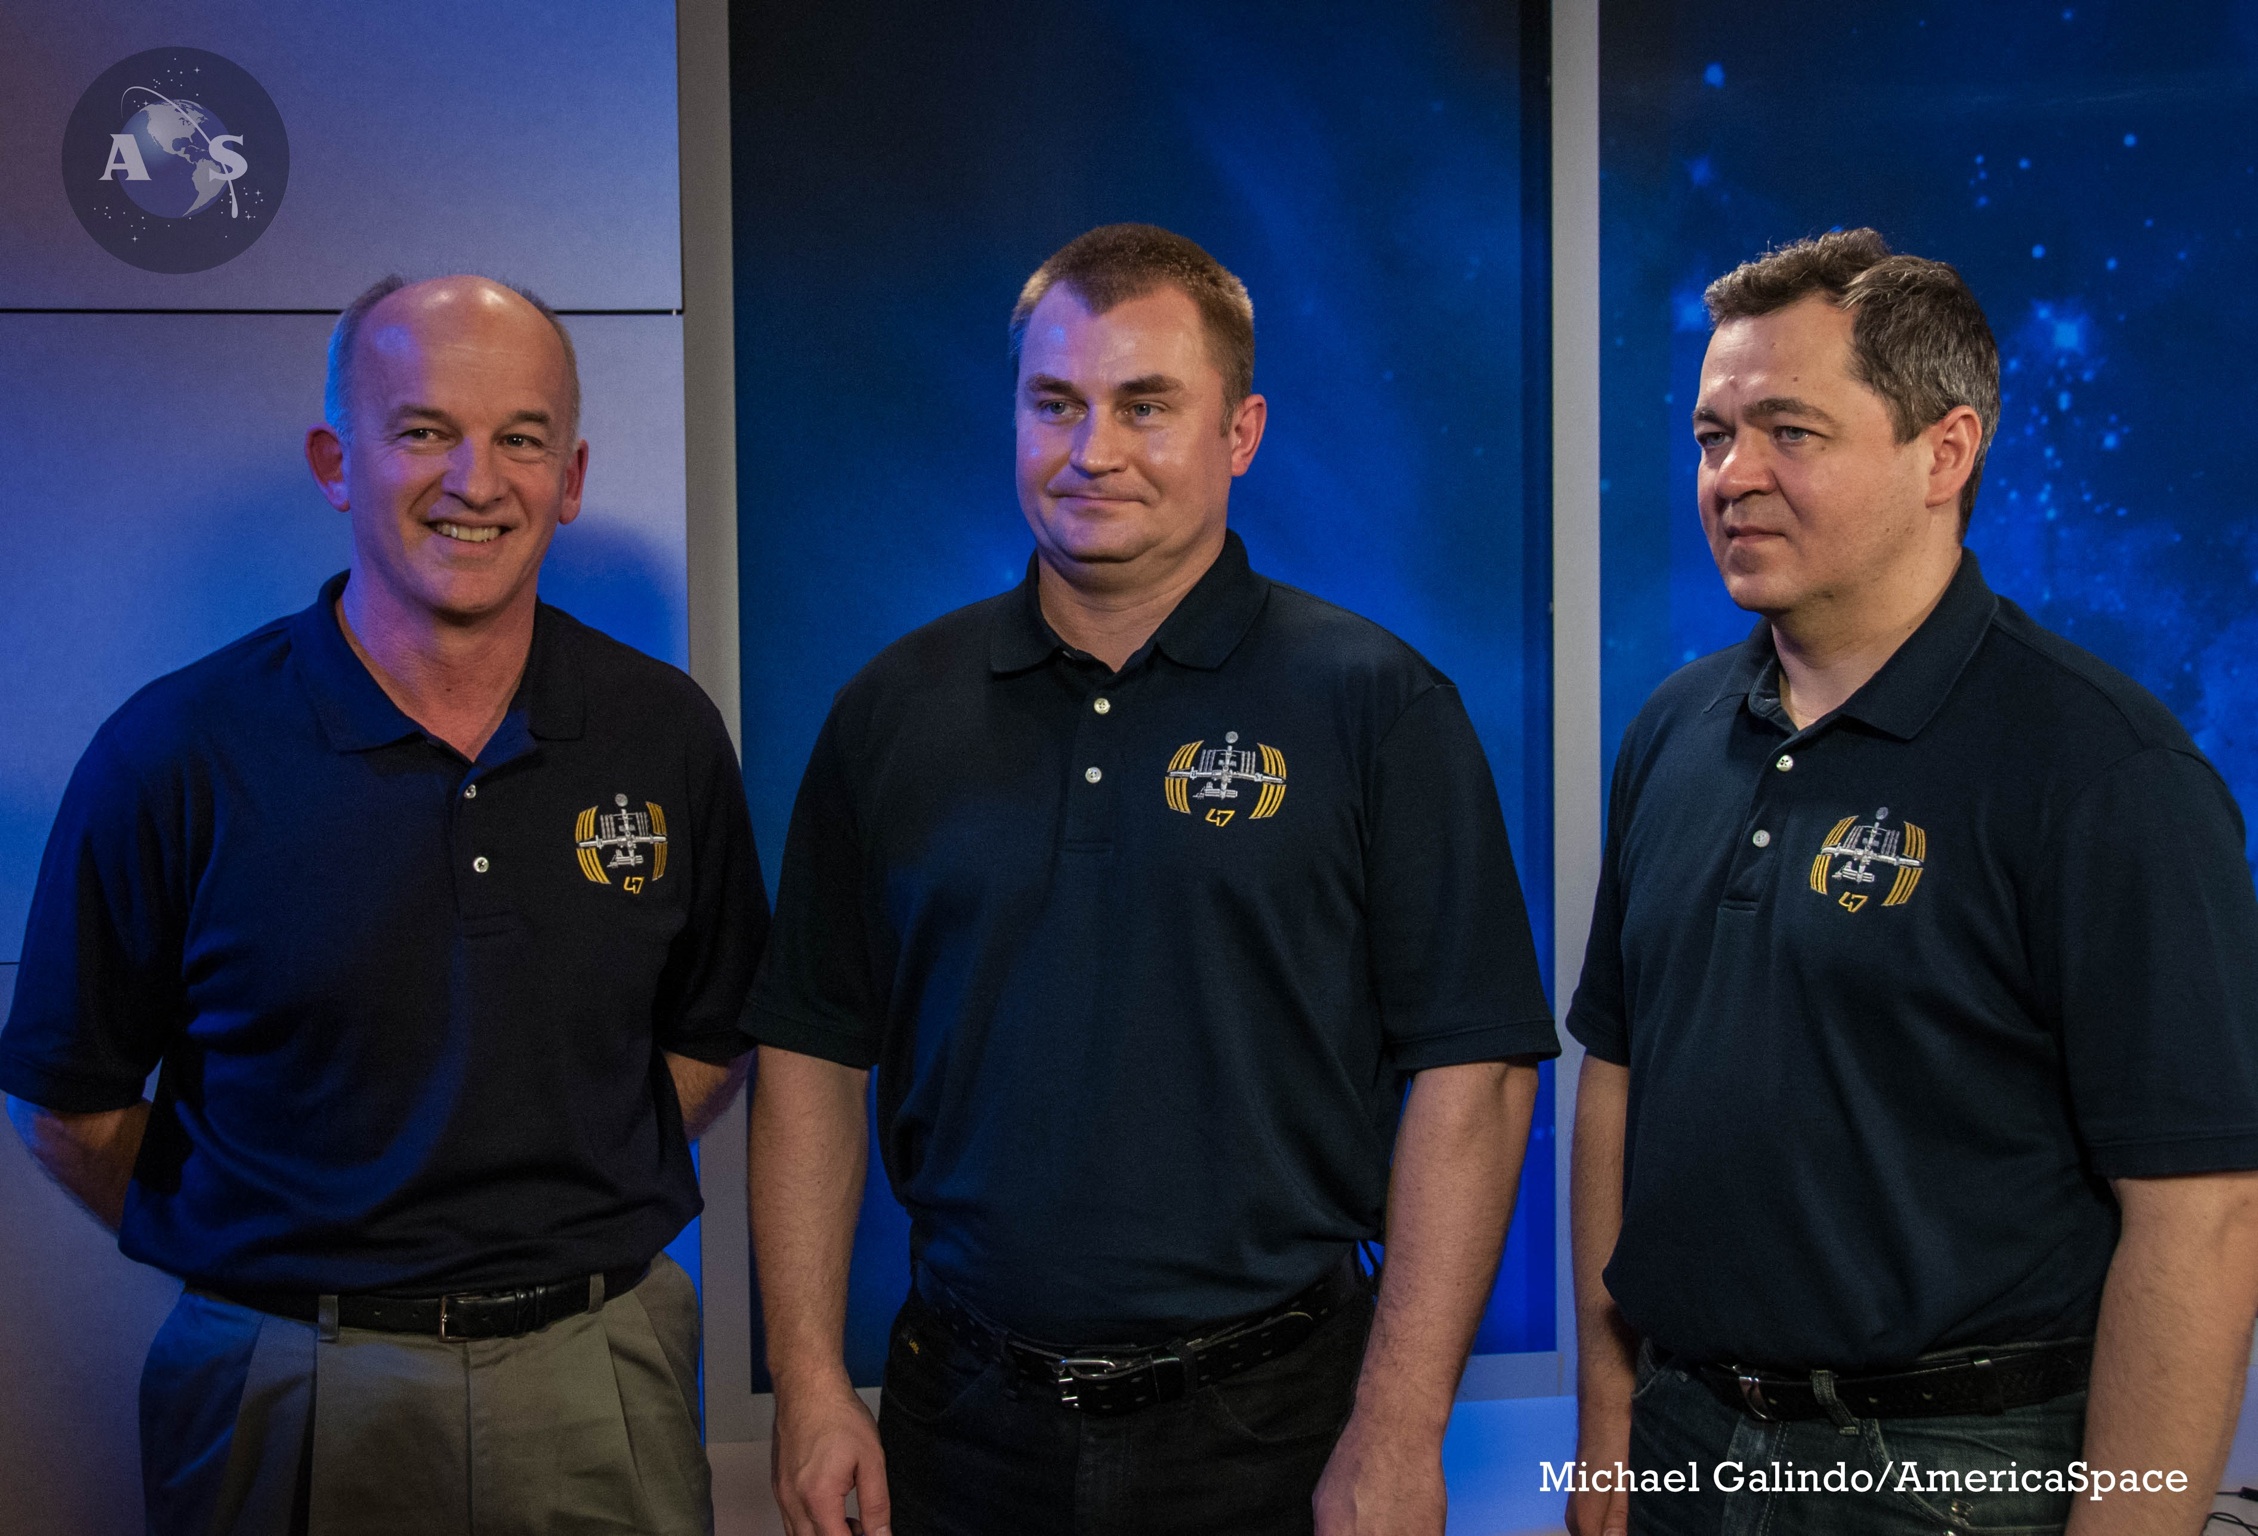 Jeff Williams (left), pictured in January 2016, stands to become America's most experienced spacefarer later this year. Photo Credit: Michael Galindo/AmericaSpace